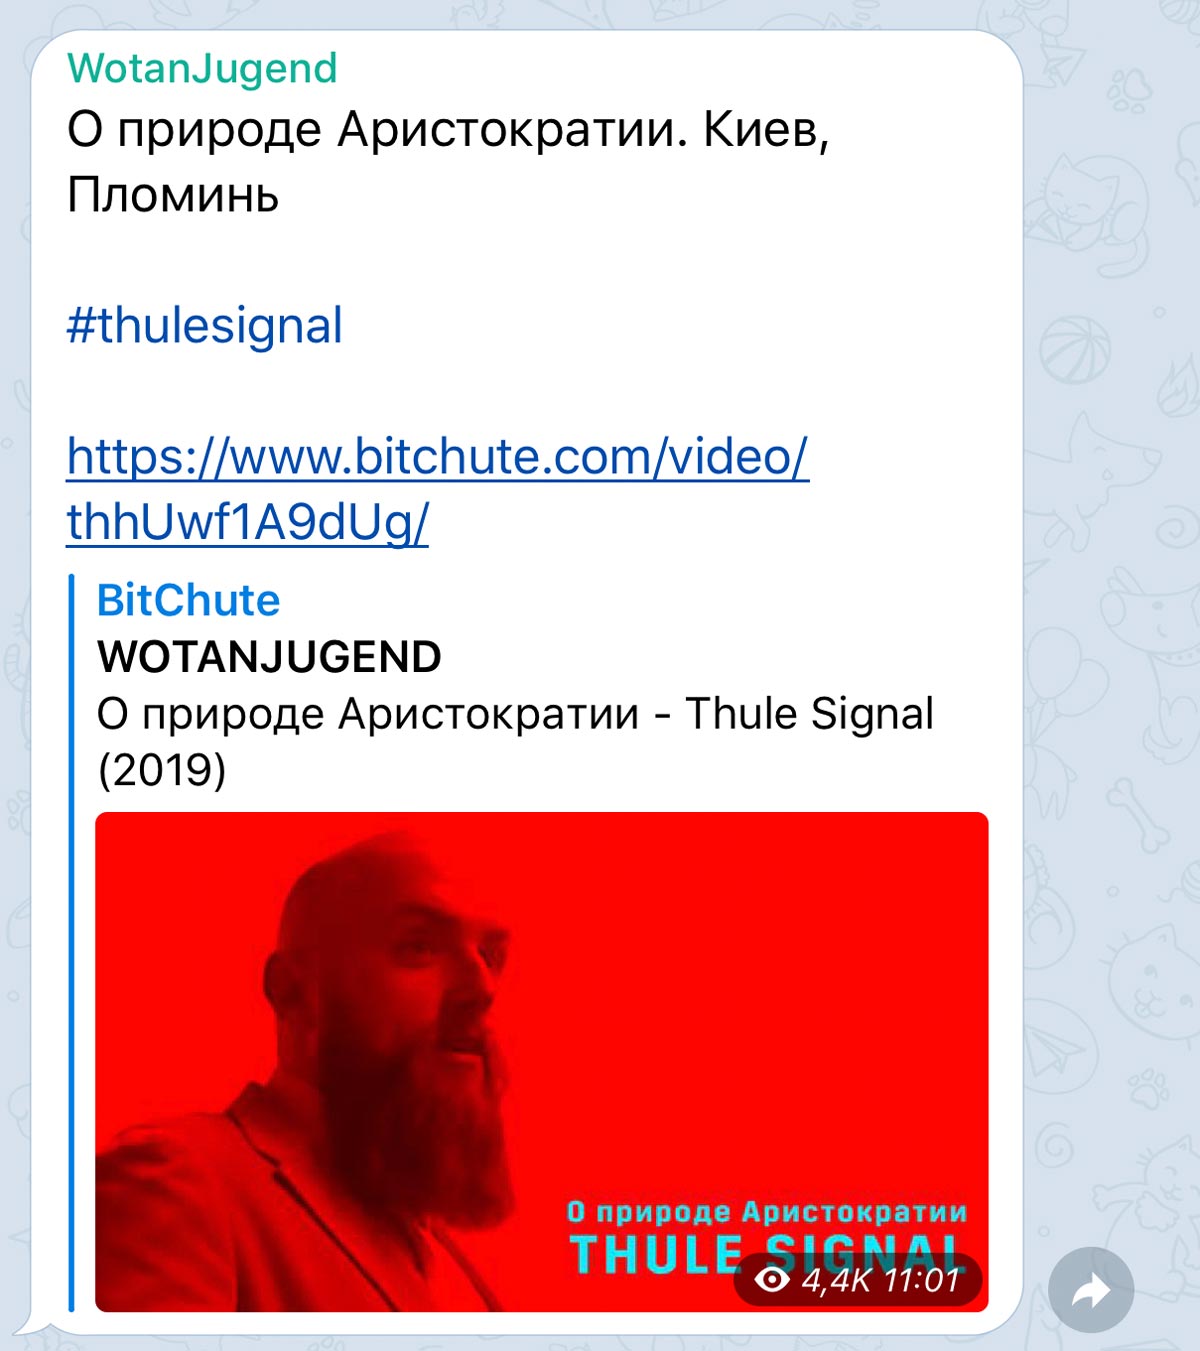 How the ultra-right in Ukraine use Telegram to promote their ideas